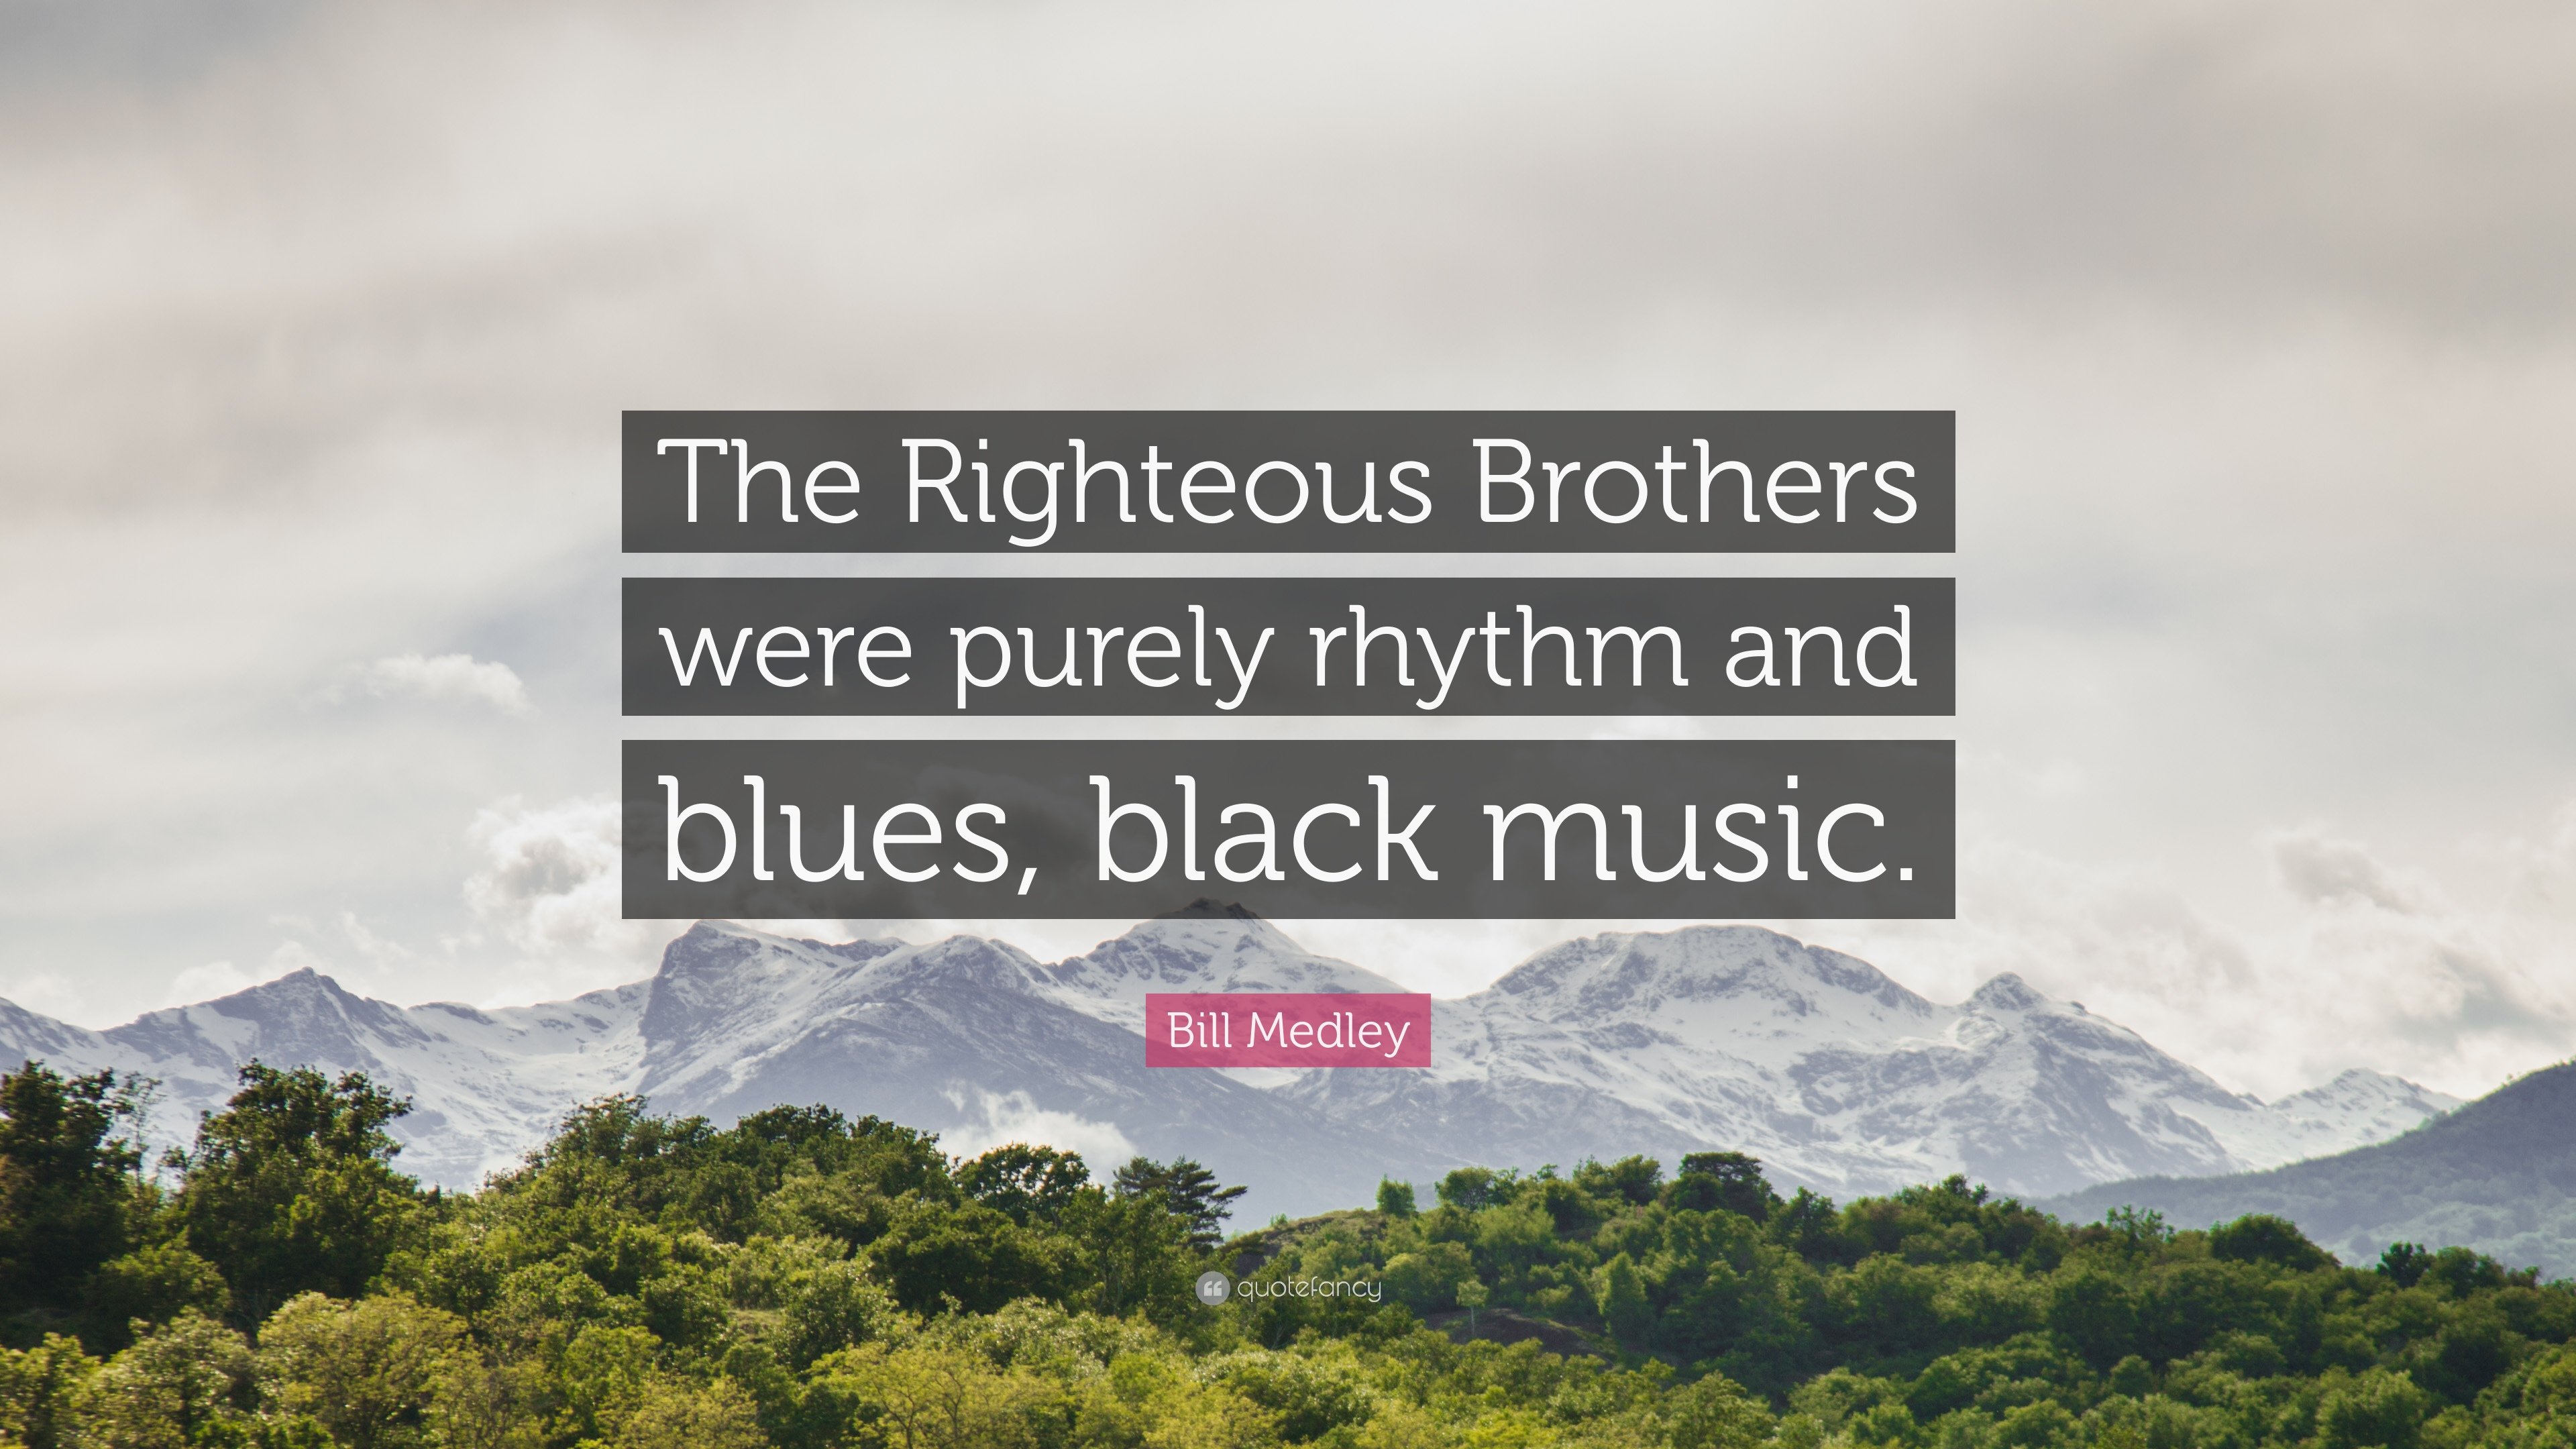 Bill Medley Quote: “The Righteous Brothers were purely rhythm